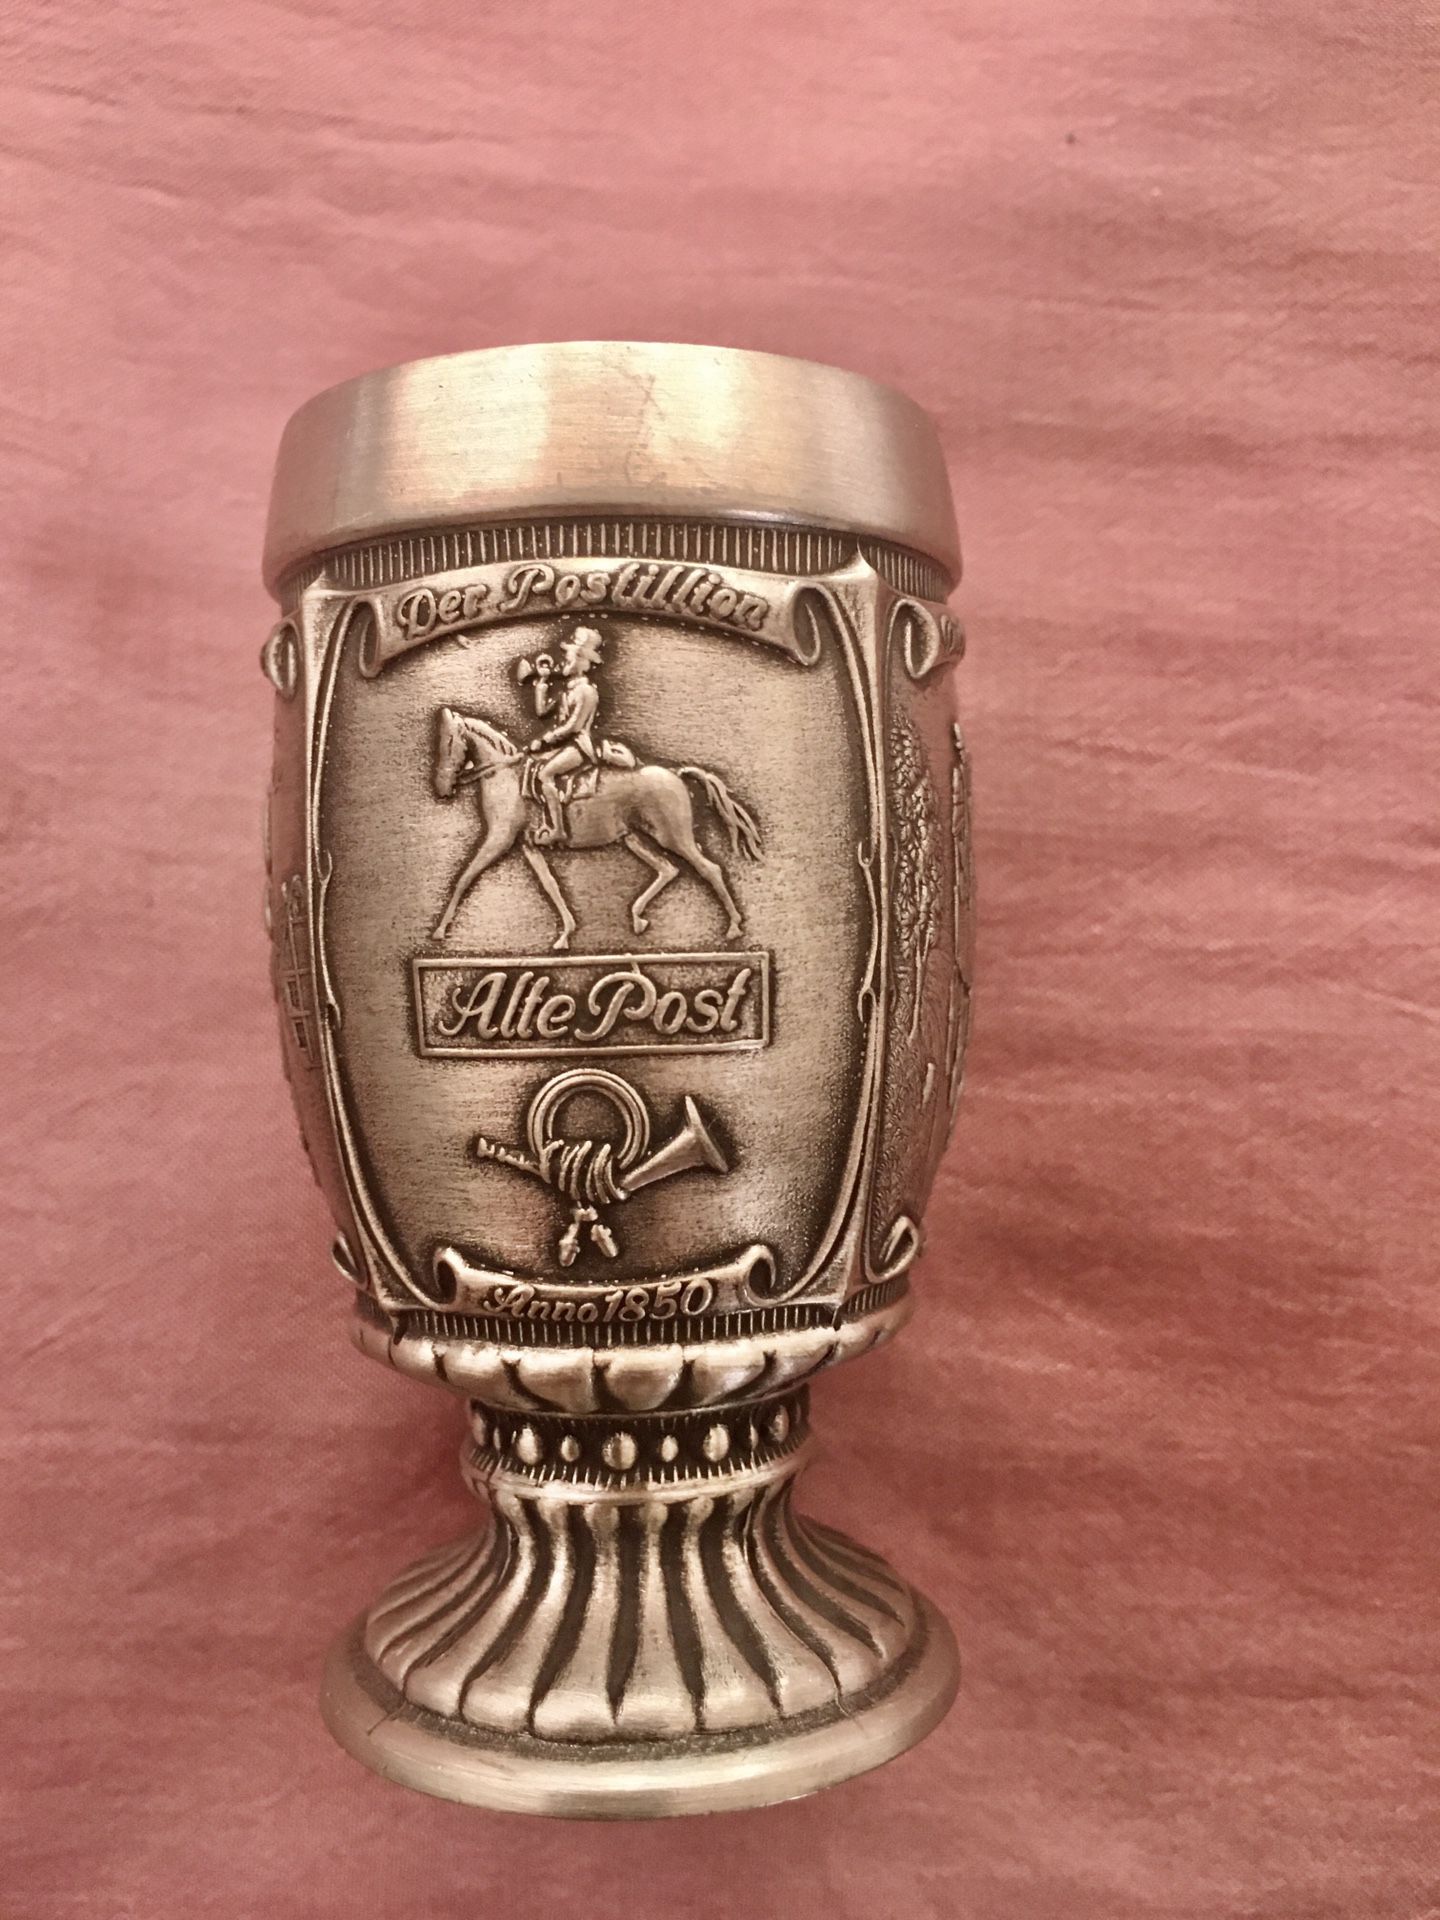 Downsizing-Collectable-German Pewter Shot Glass. Make an offer.